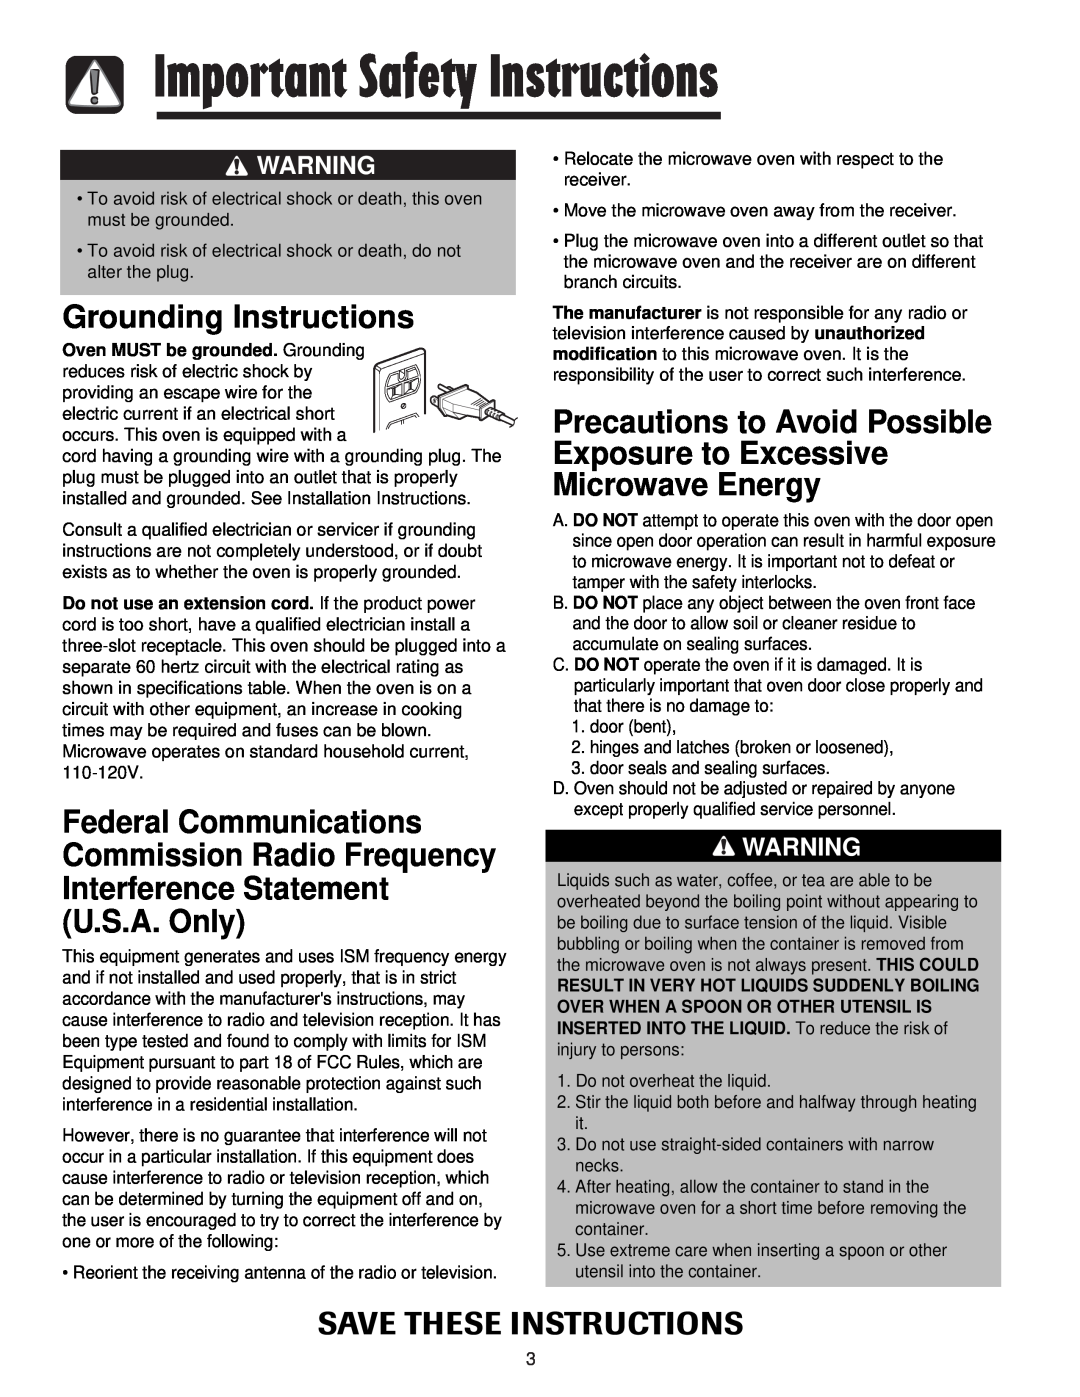 Maytag JMV8208AA/AC Grounding Instructions, Federal Communications Commission Radio Frequency, Save These Instructions 